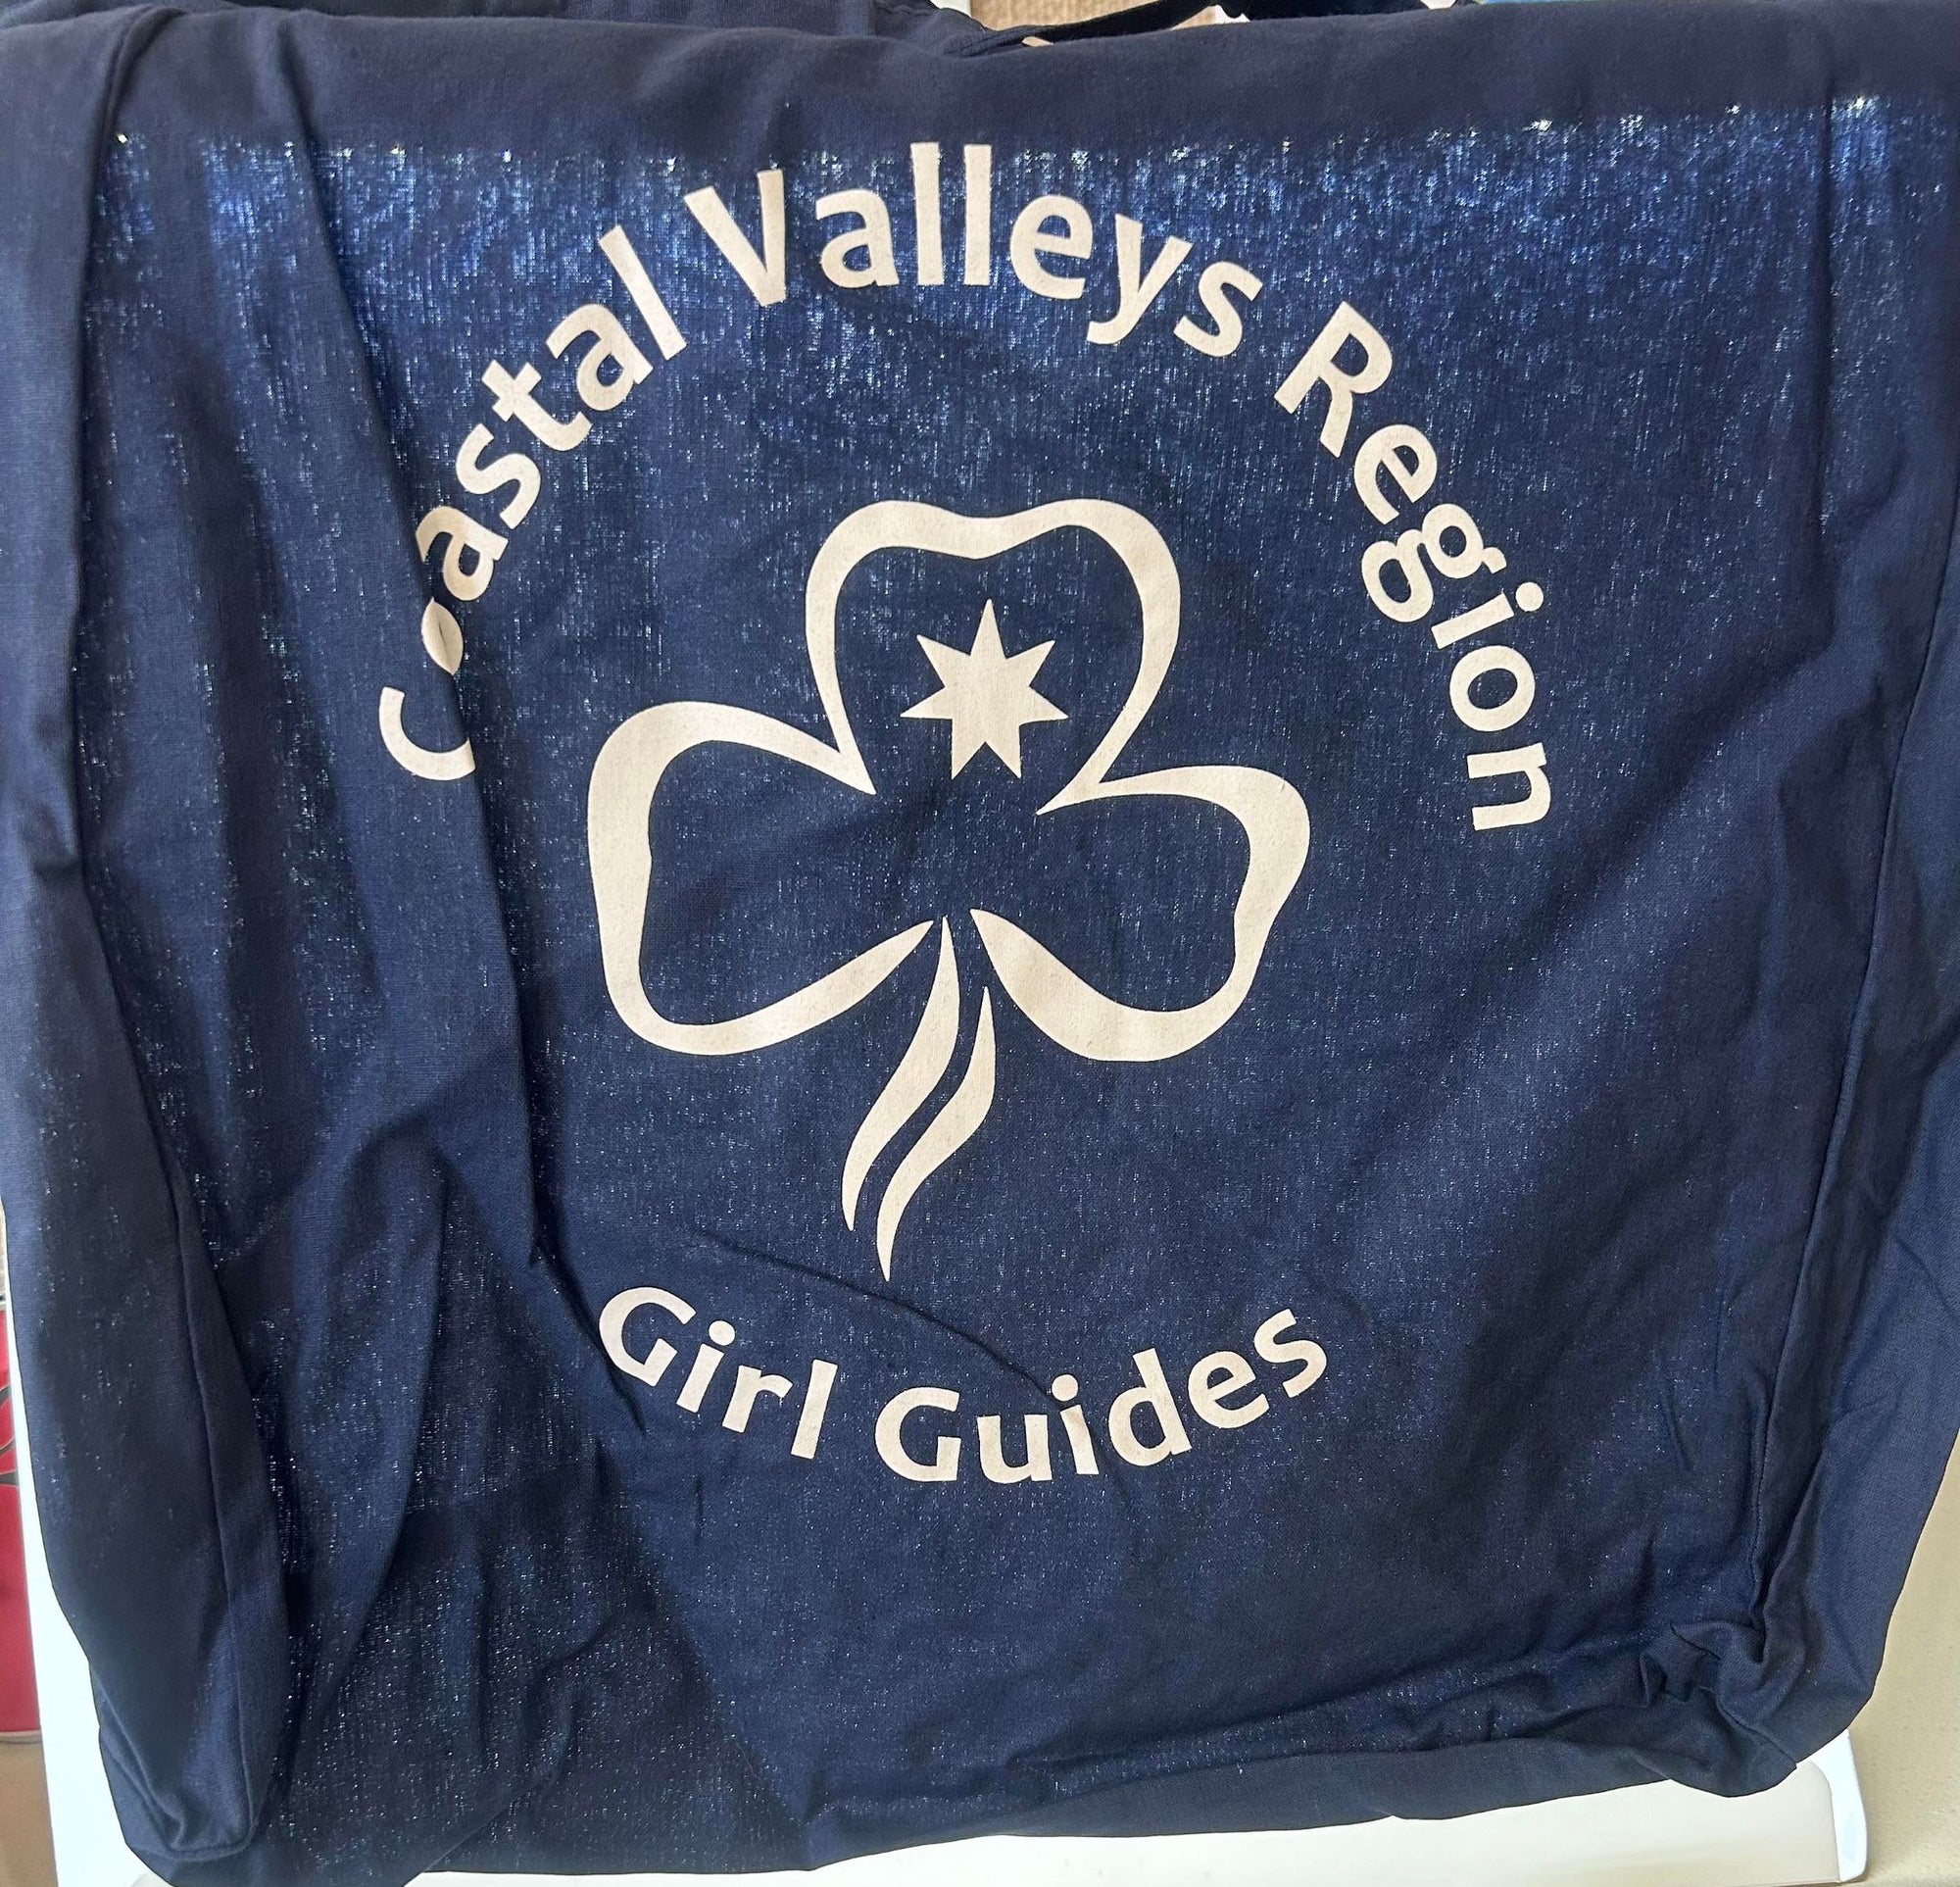 a navy cotton bag with CVR Girl Guides and a trefoil on one side